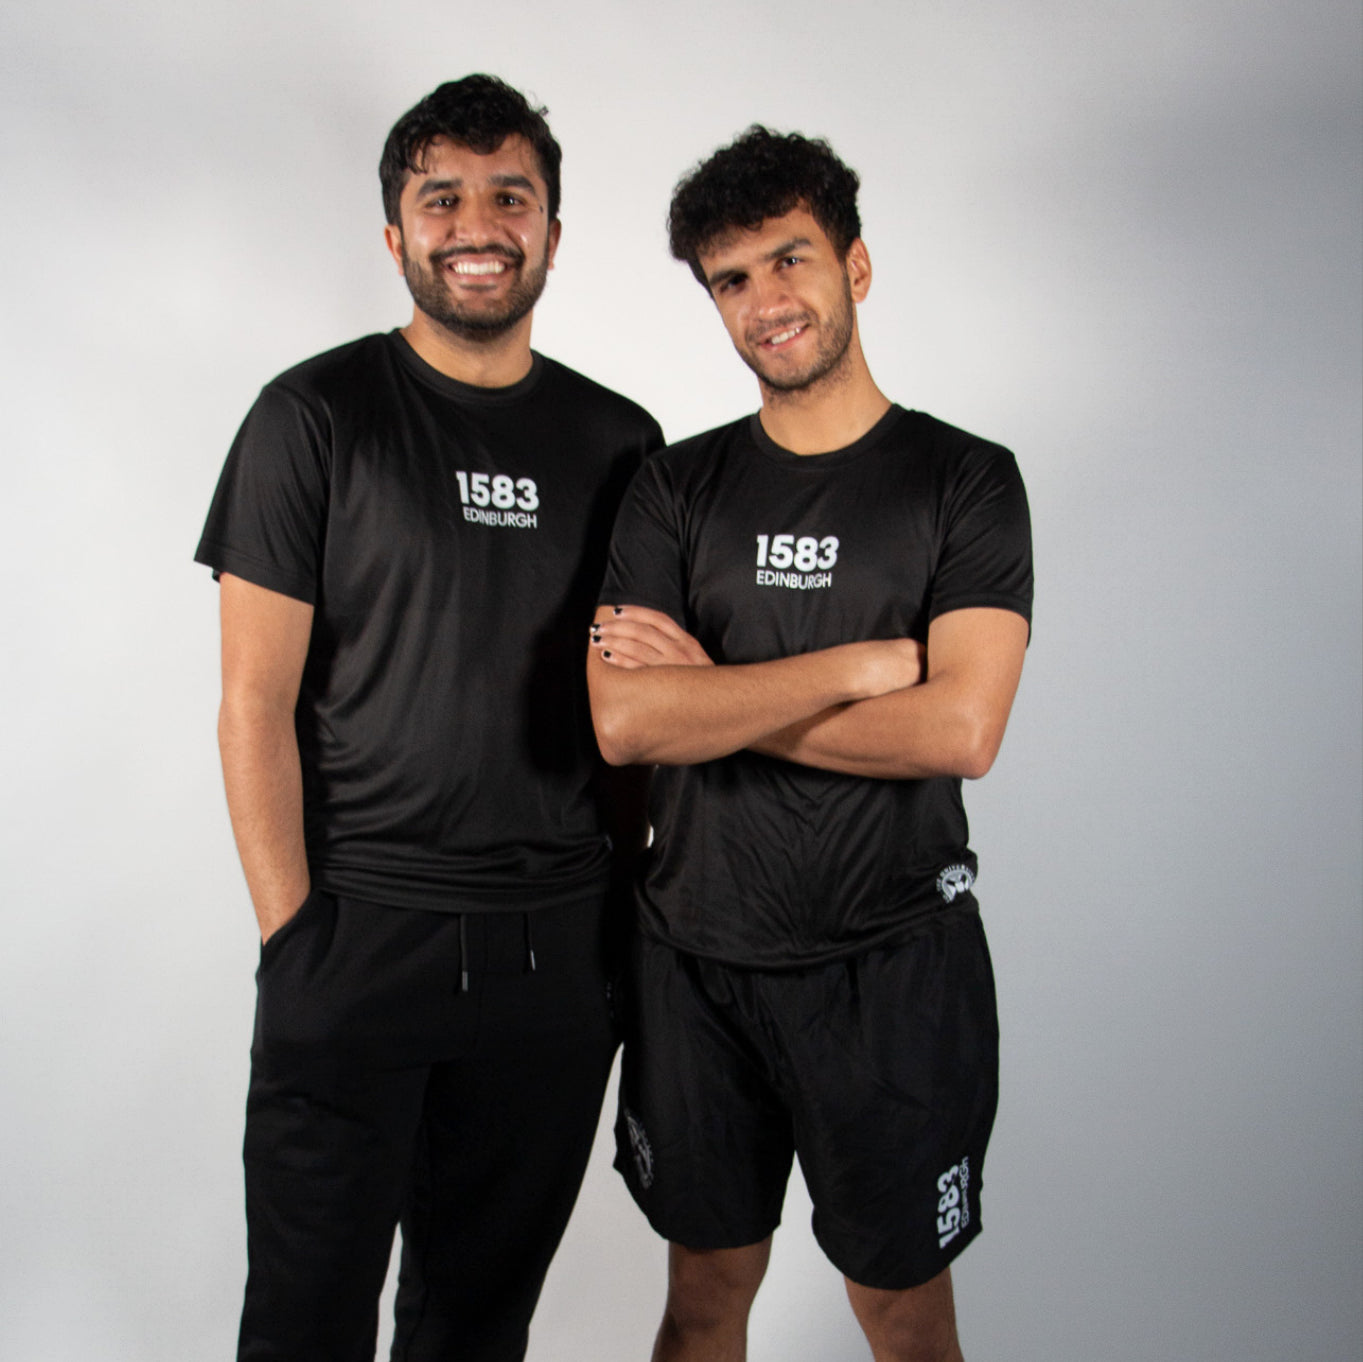 Our models both wear the recycled sports tshirt in black 